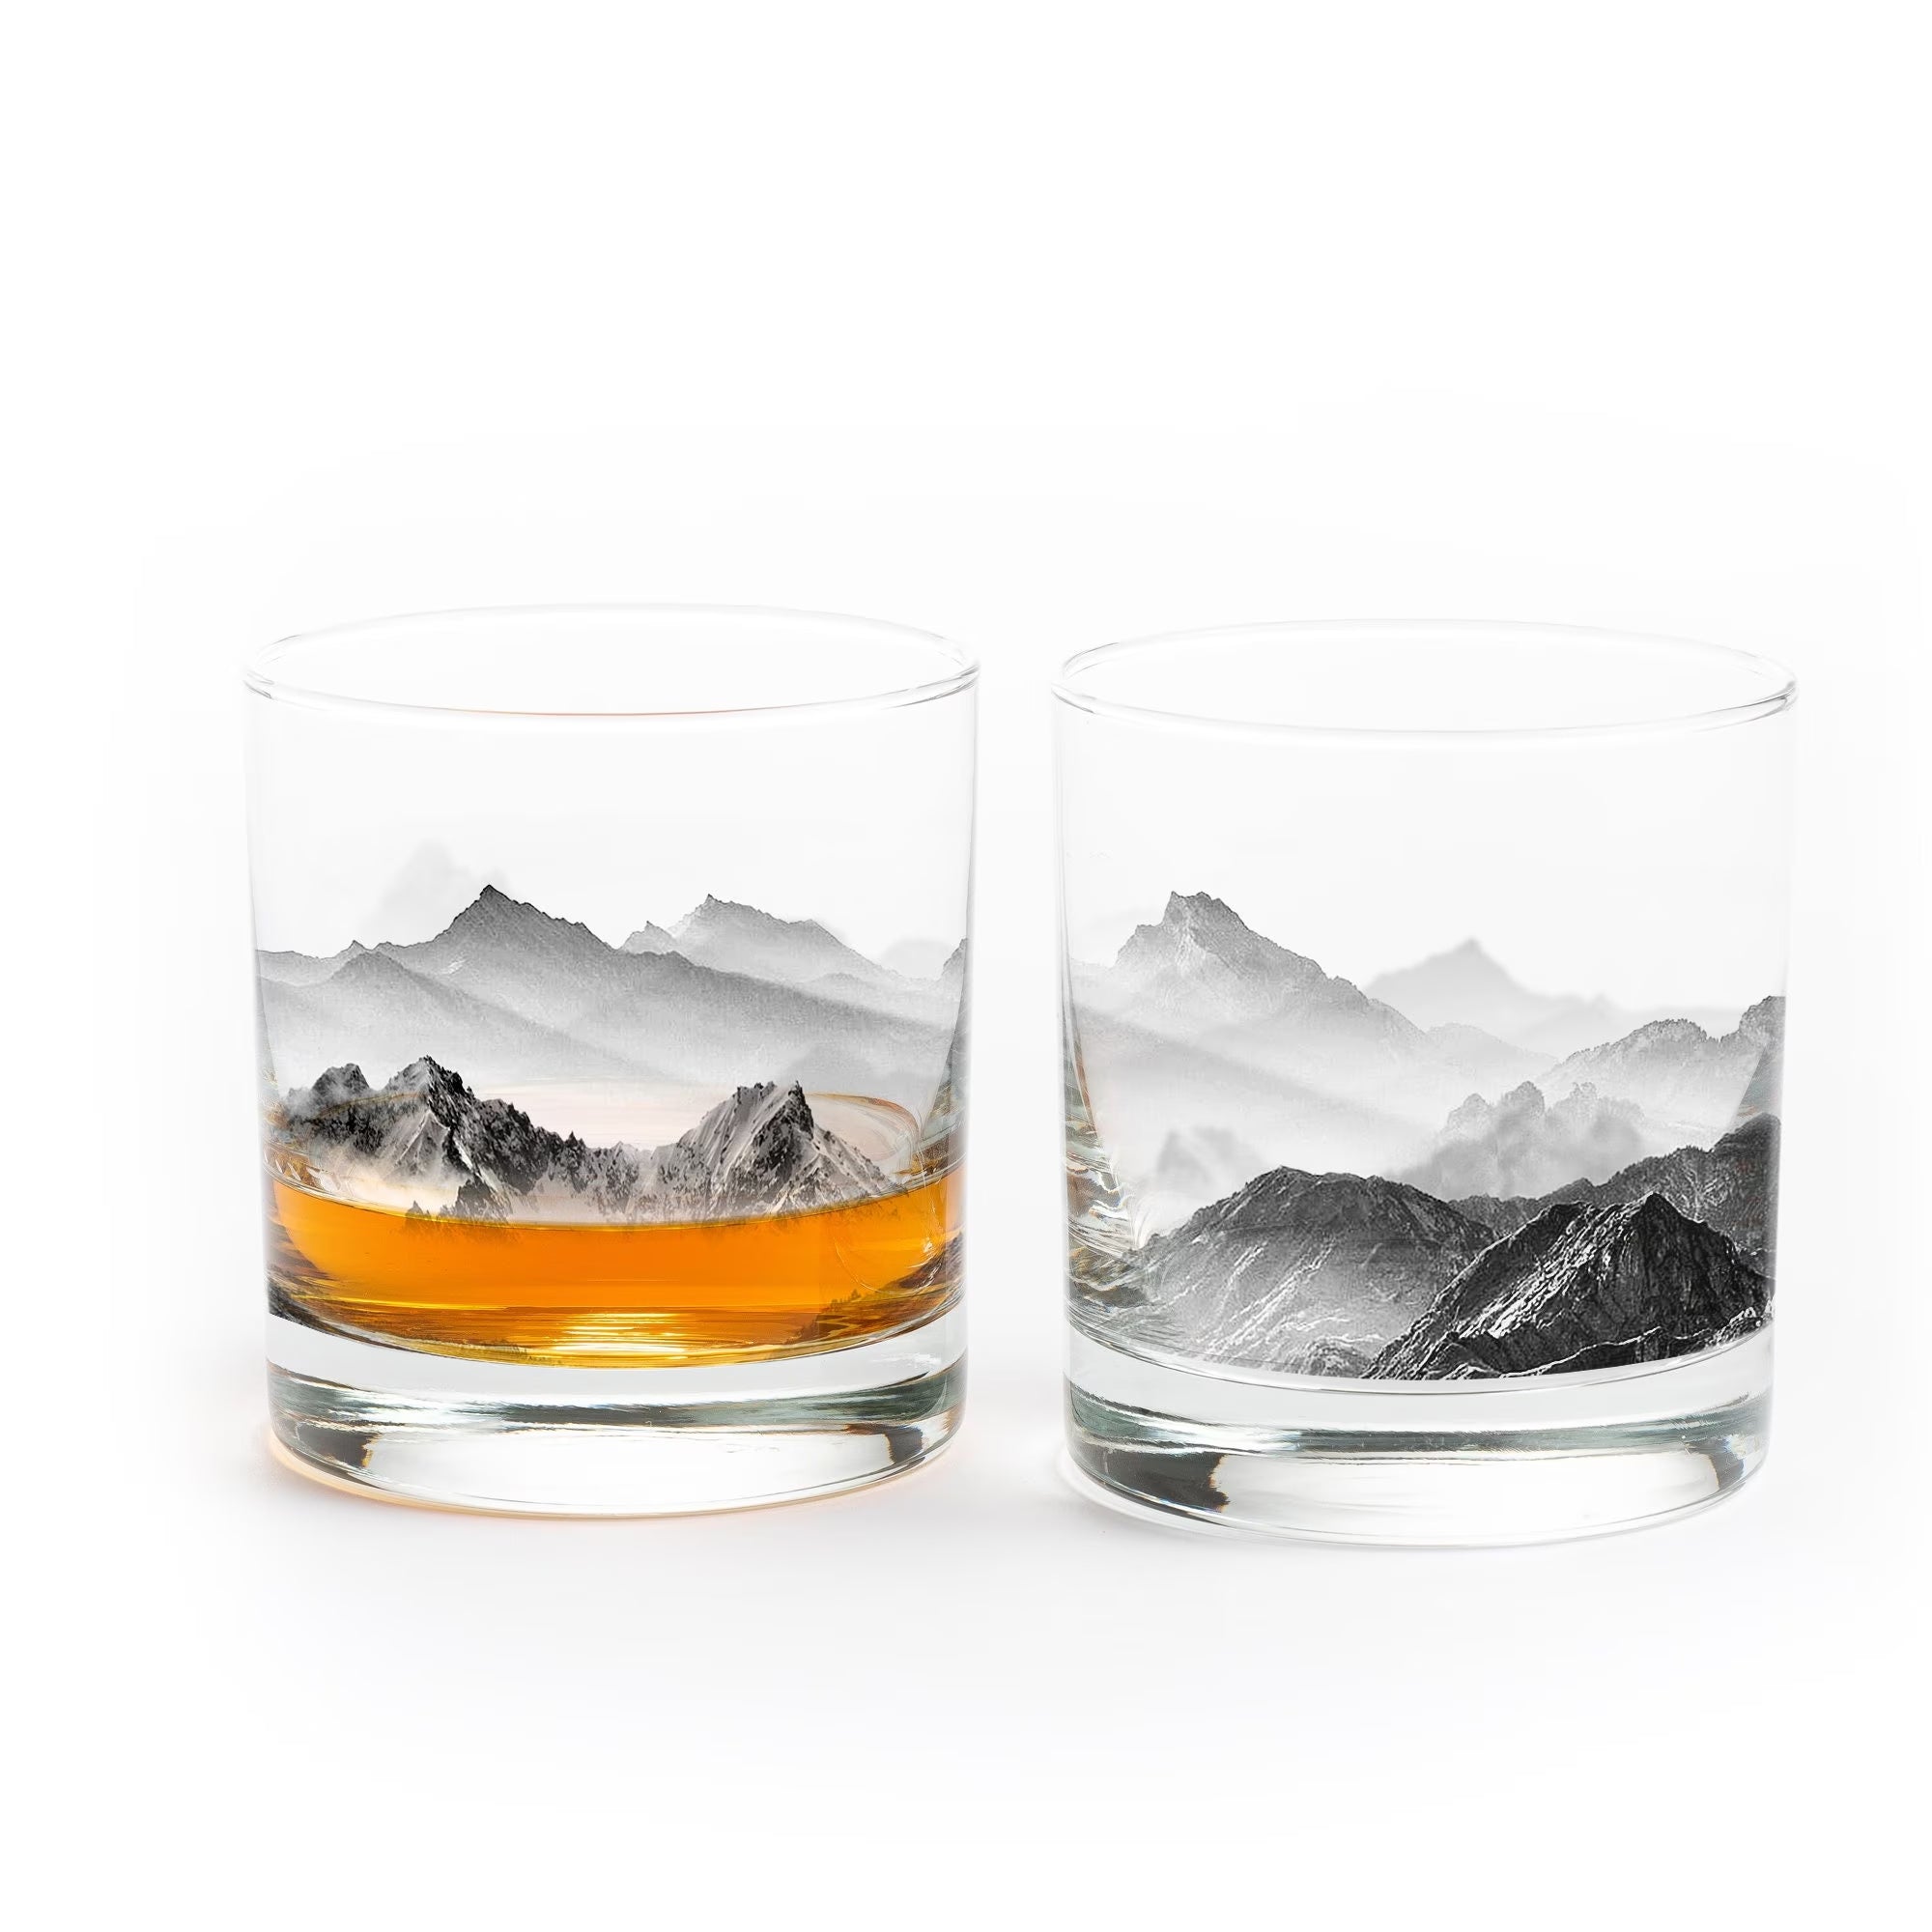 Mountains and Clouds Rock Glass Set - Mountain and Nature Themed Kitchen Glasses - Whiskey Lover Gift - Whiskey Glasses Set of Two 11Oz.